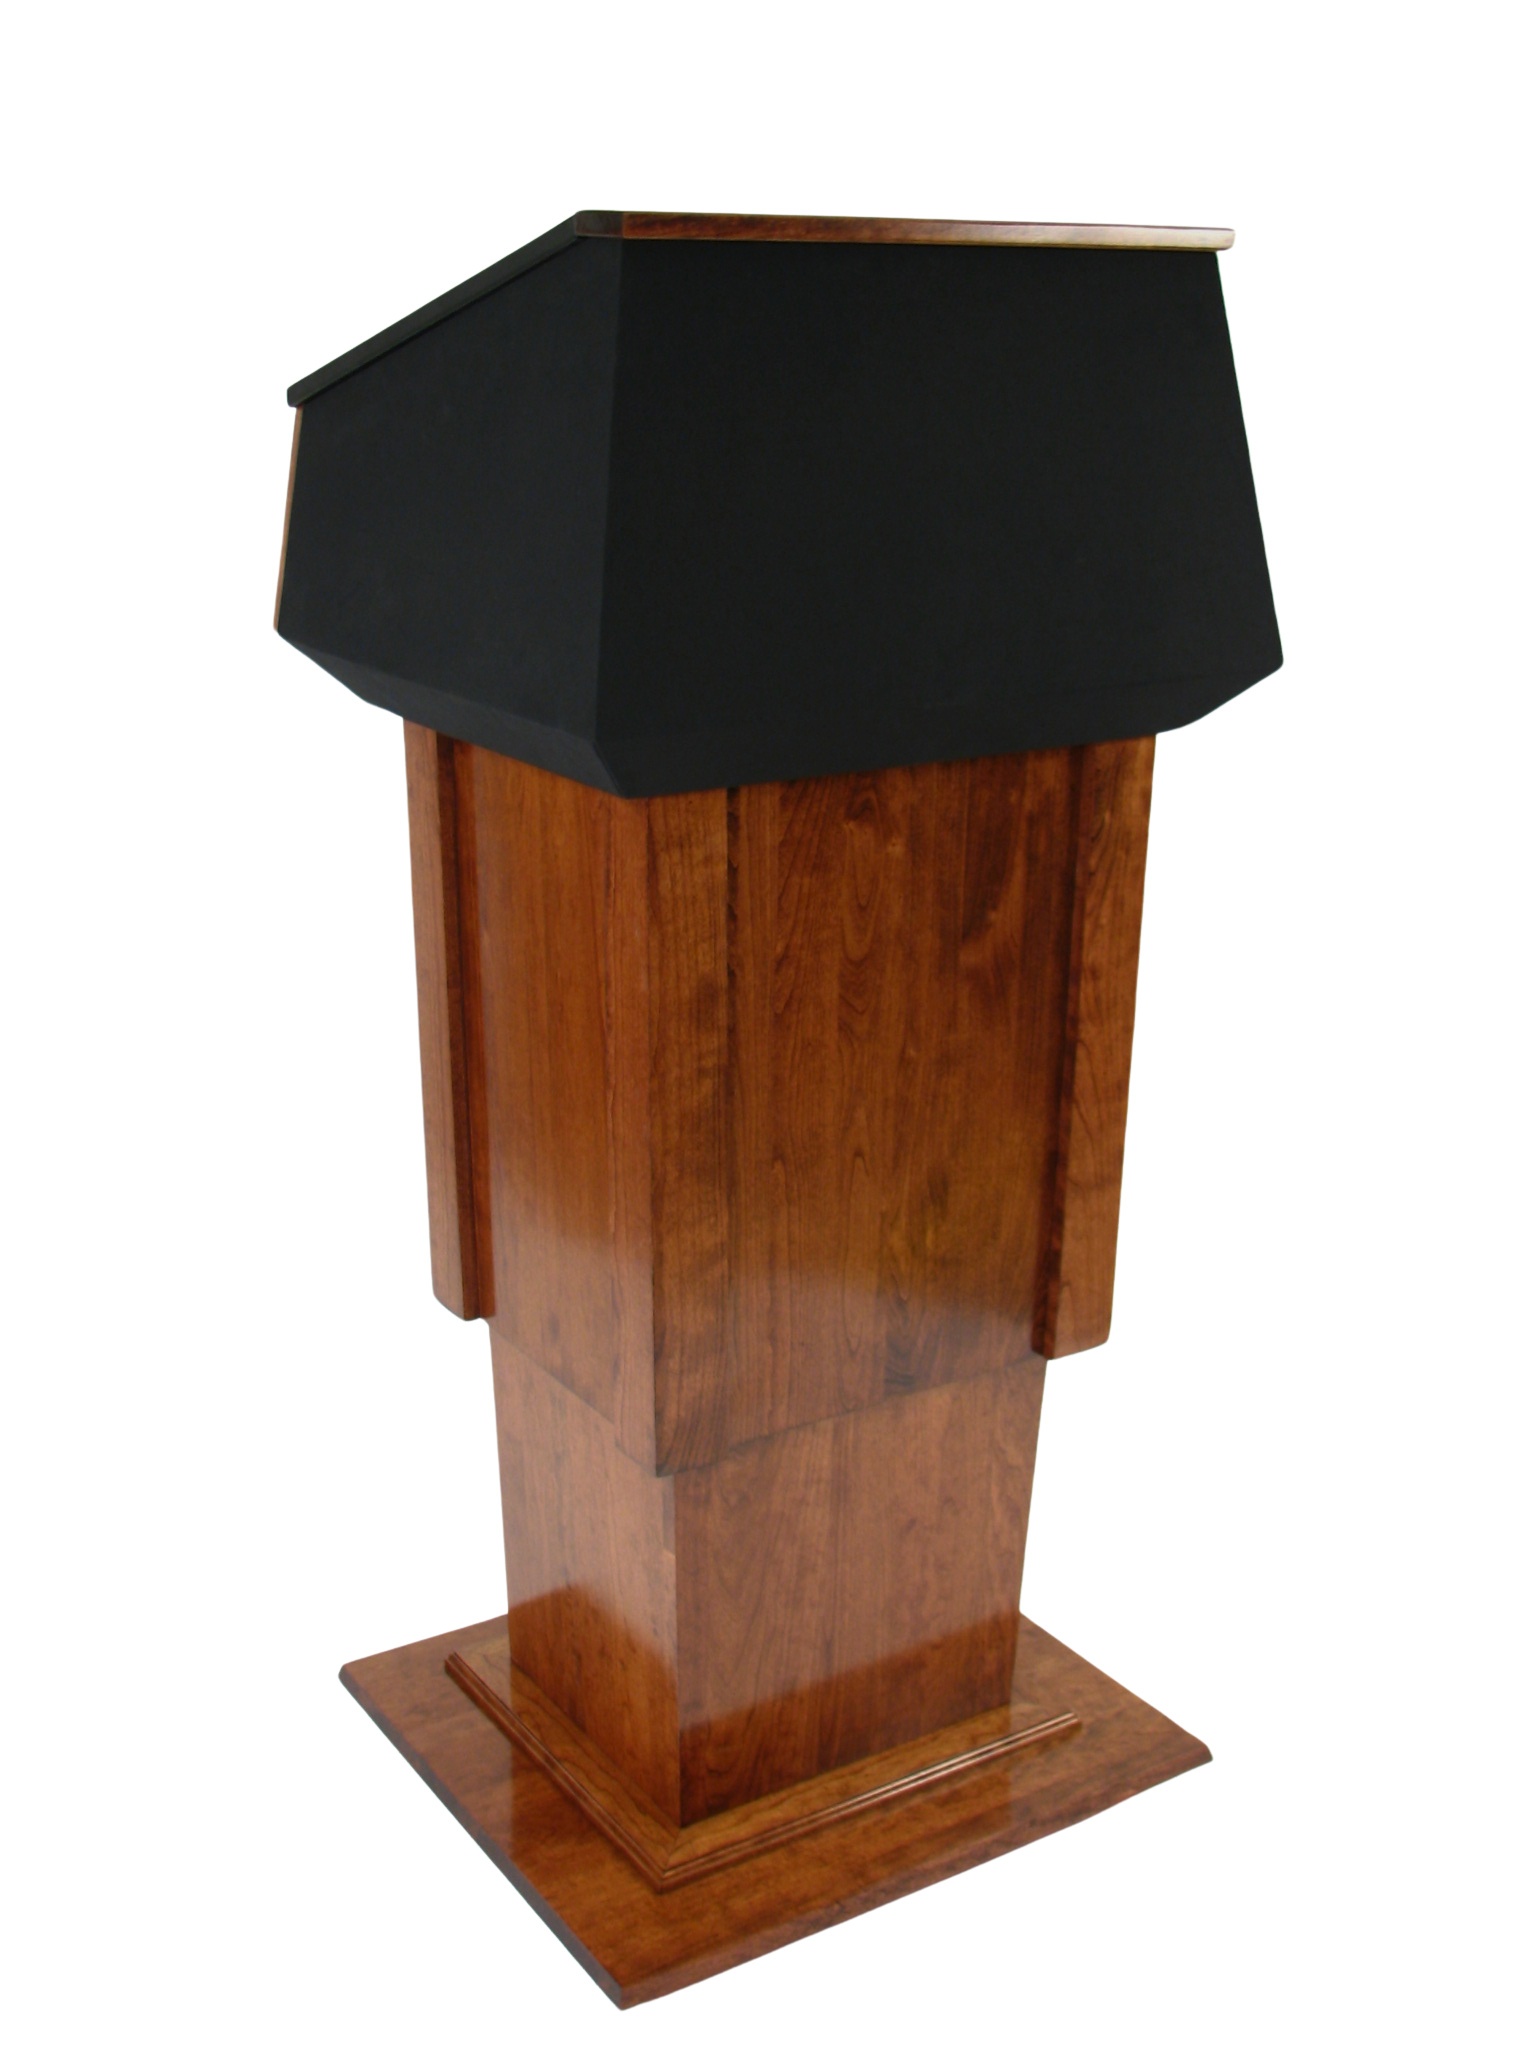 PRES500-LIFT-C-RM-K Presidential Lift Cherry with Red Mahogany Stain and Black Top Front High